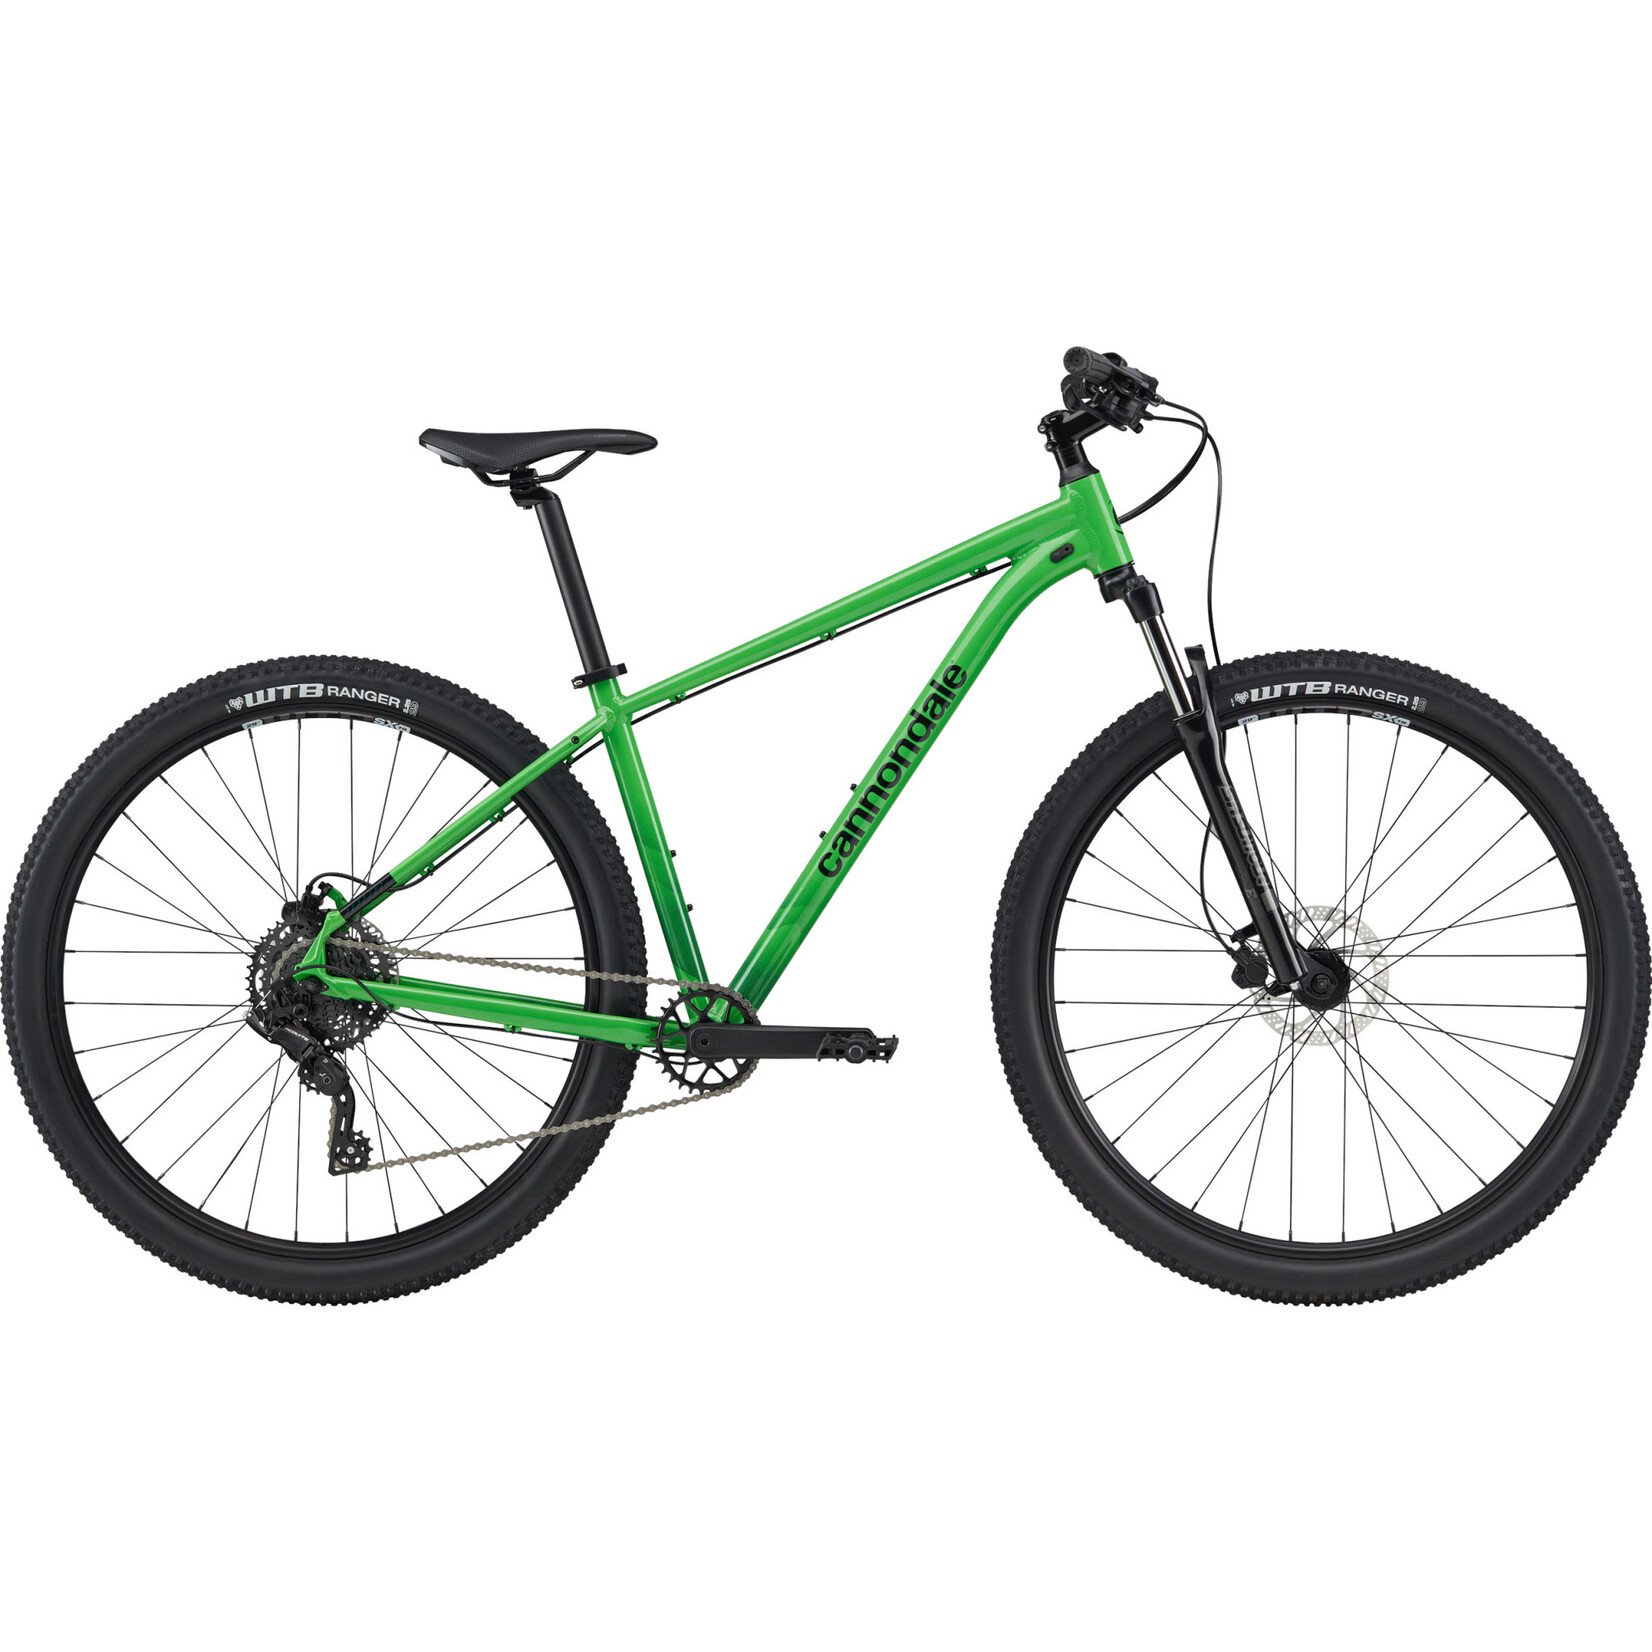 Cannondale Cannondale Trail 7.1 GRN MD